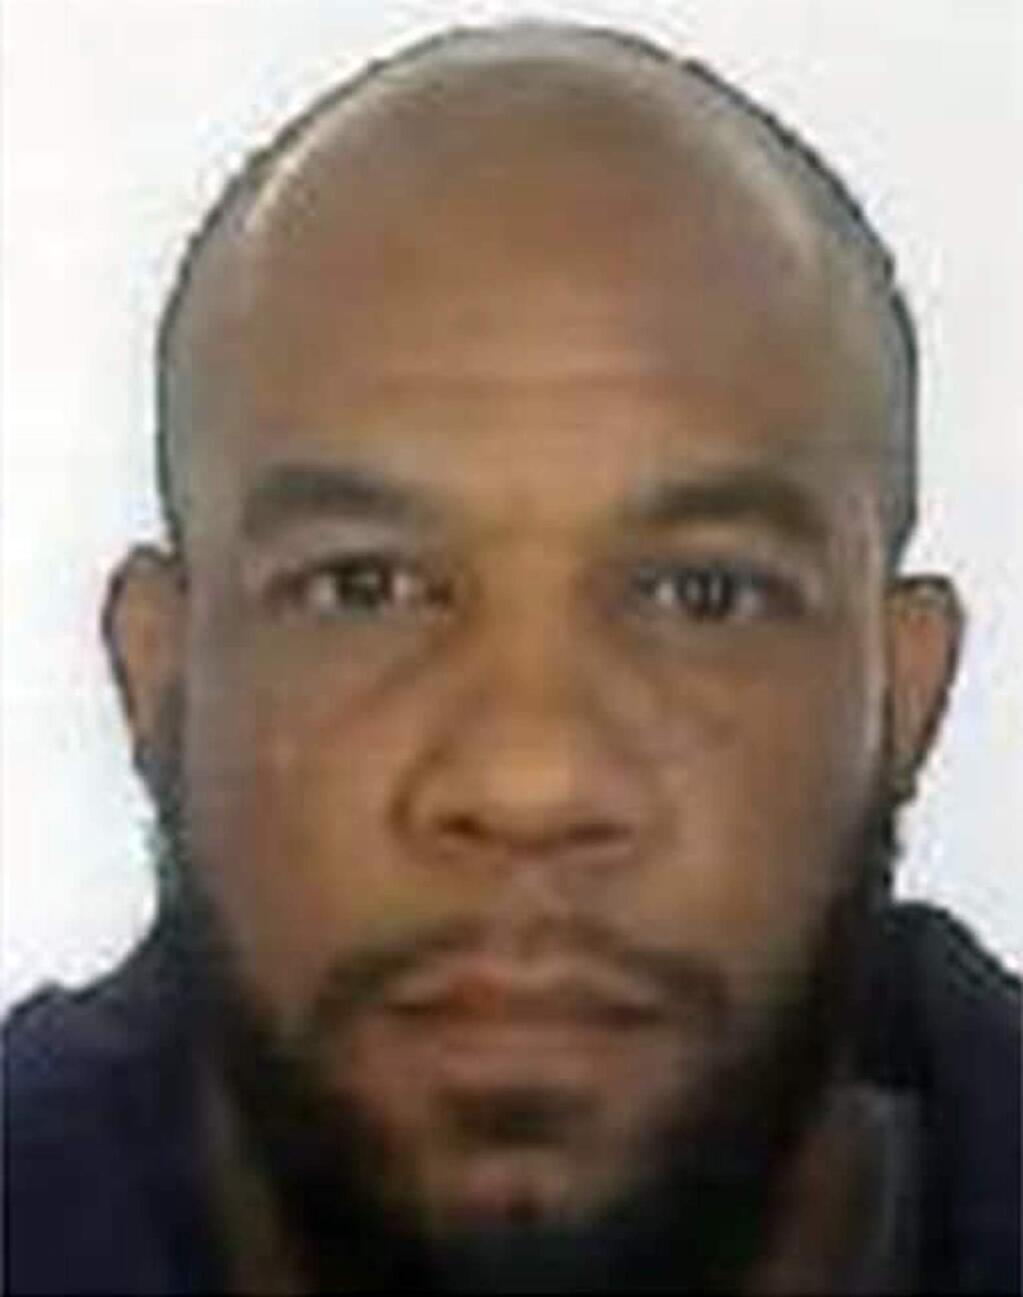 FILE -- This undated file photo released by the Metropolitan Police, shows Khalid Masood, who authorities identified as the man who mowed down pedestrians and stabbed a policeman to death outside Parliament March 22, 2017, in London. Masood, the British man who killed several people in a rampage in London last week made had three trips to Saudi Arabia in his lifetime. Though millions of foreigners from around the world live and work in the kingdom,Masood's time there immediately raised questions about whether the country's ultraconservative brand of Islam impacted his worldview. (Metropolitan Police via AP, File)